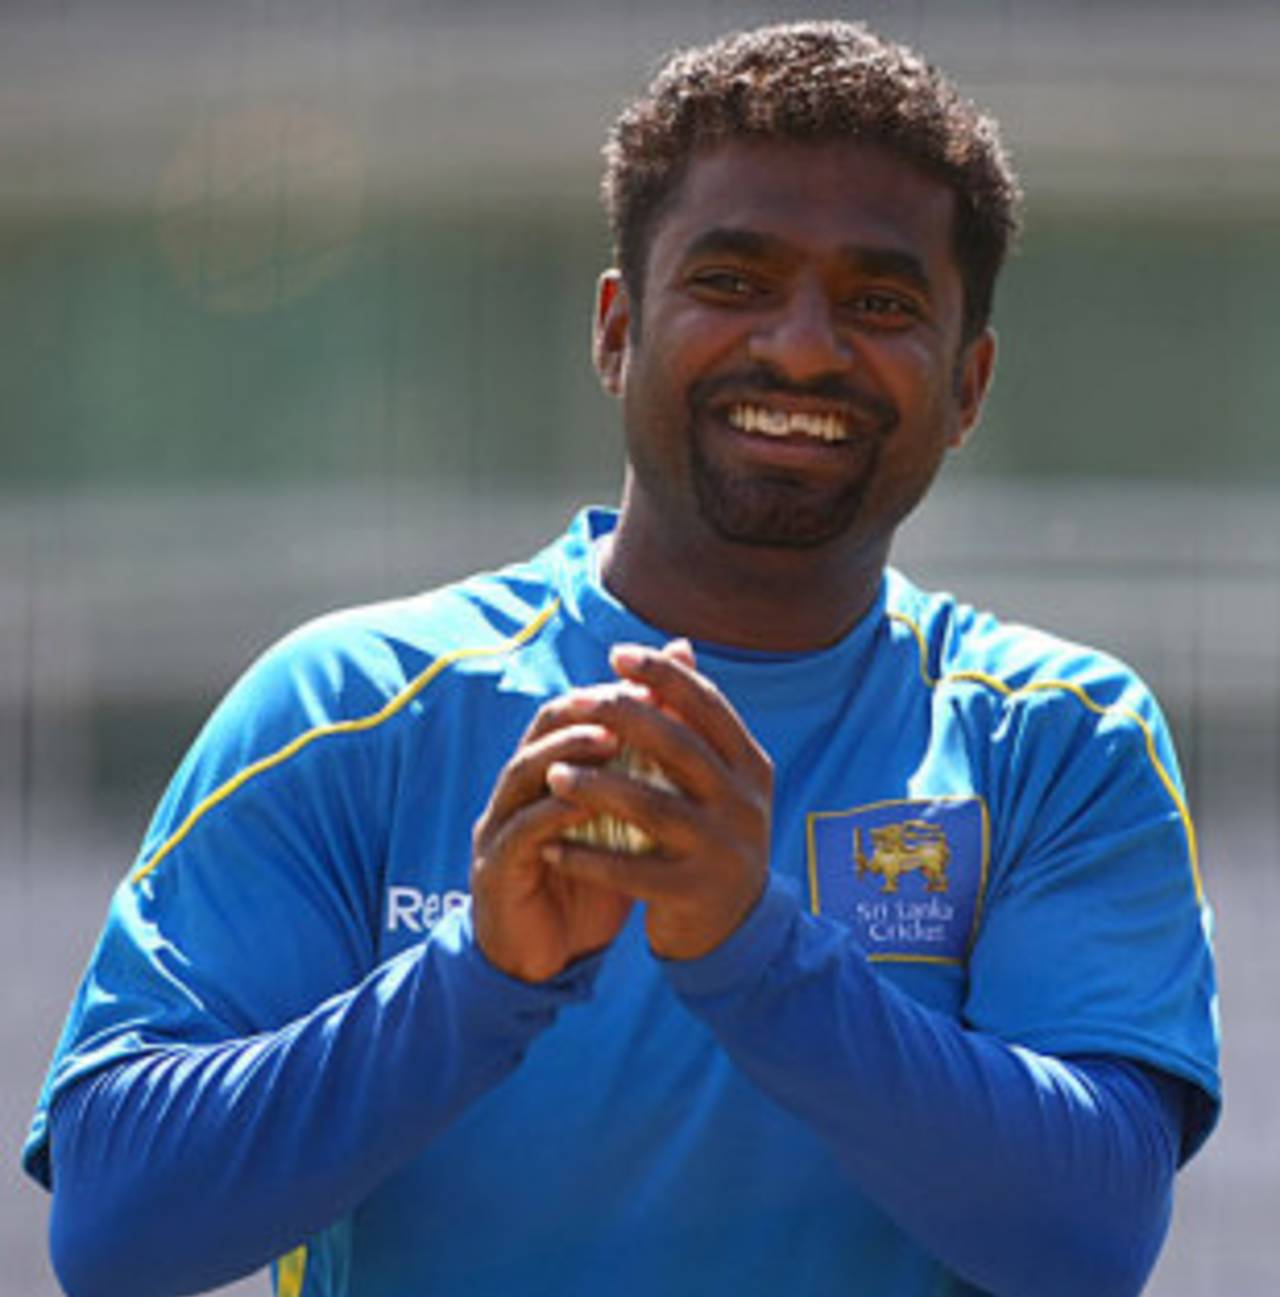 Muttiah Muralitharan said he will focus on representing his country in one-day cricket until the 2011 World Cup and thereafter will stick to Twenty20 cricket.&nbsp;&nbsp;&bull;&nbsp;&nbsp;Getty Images